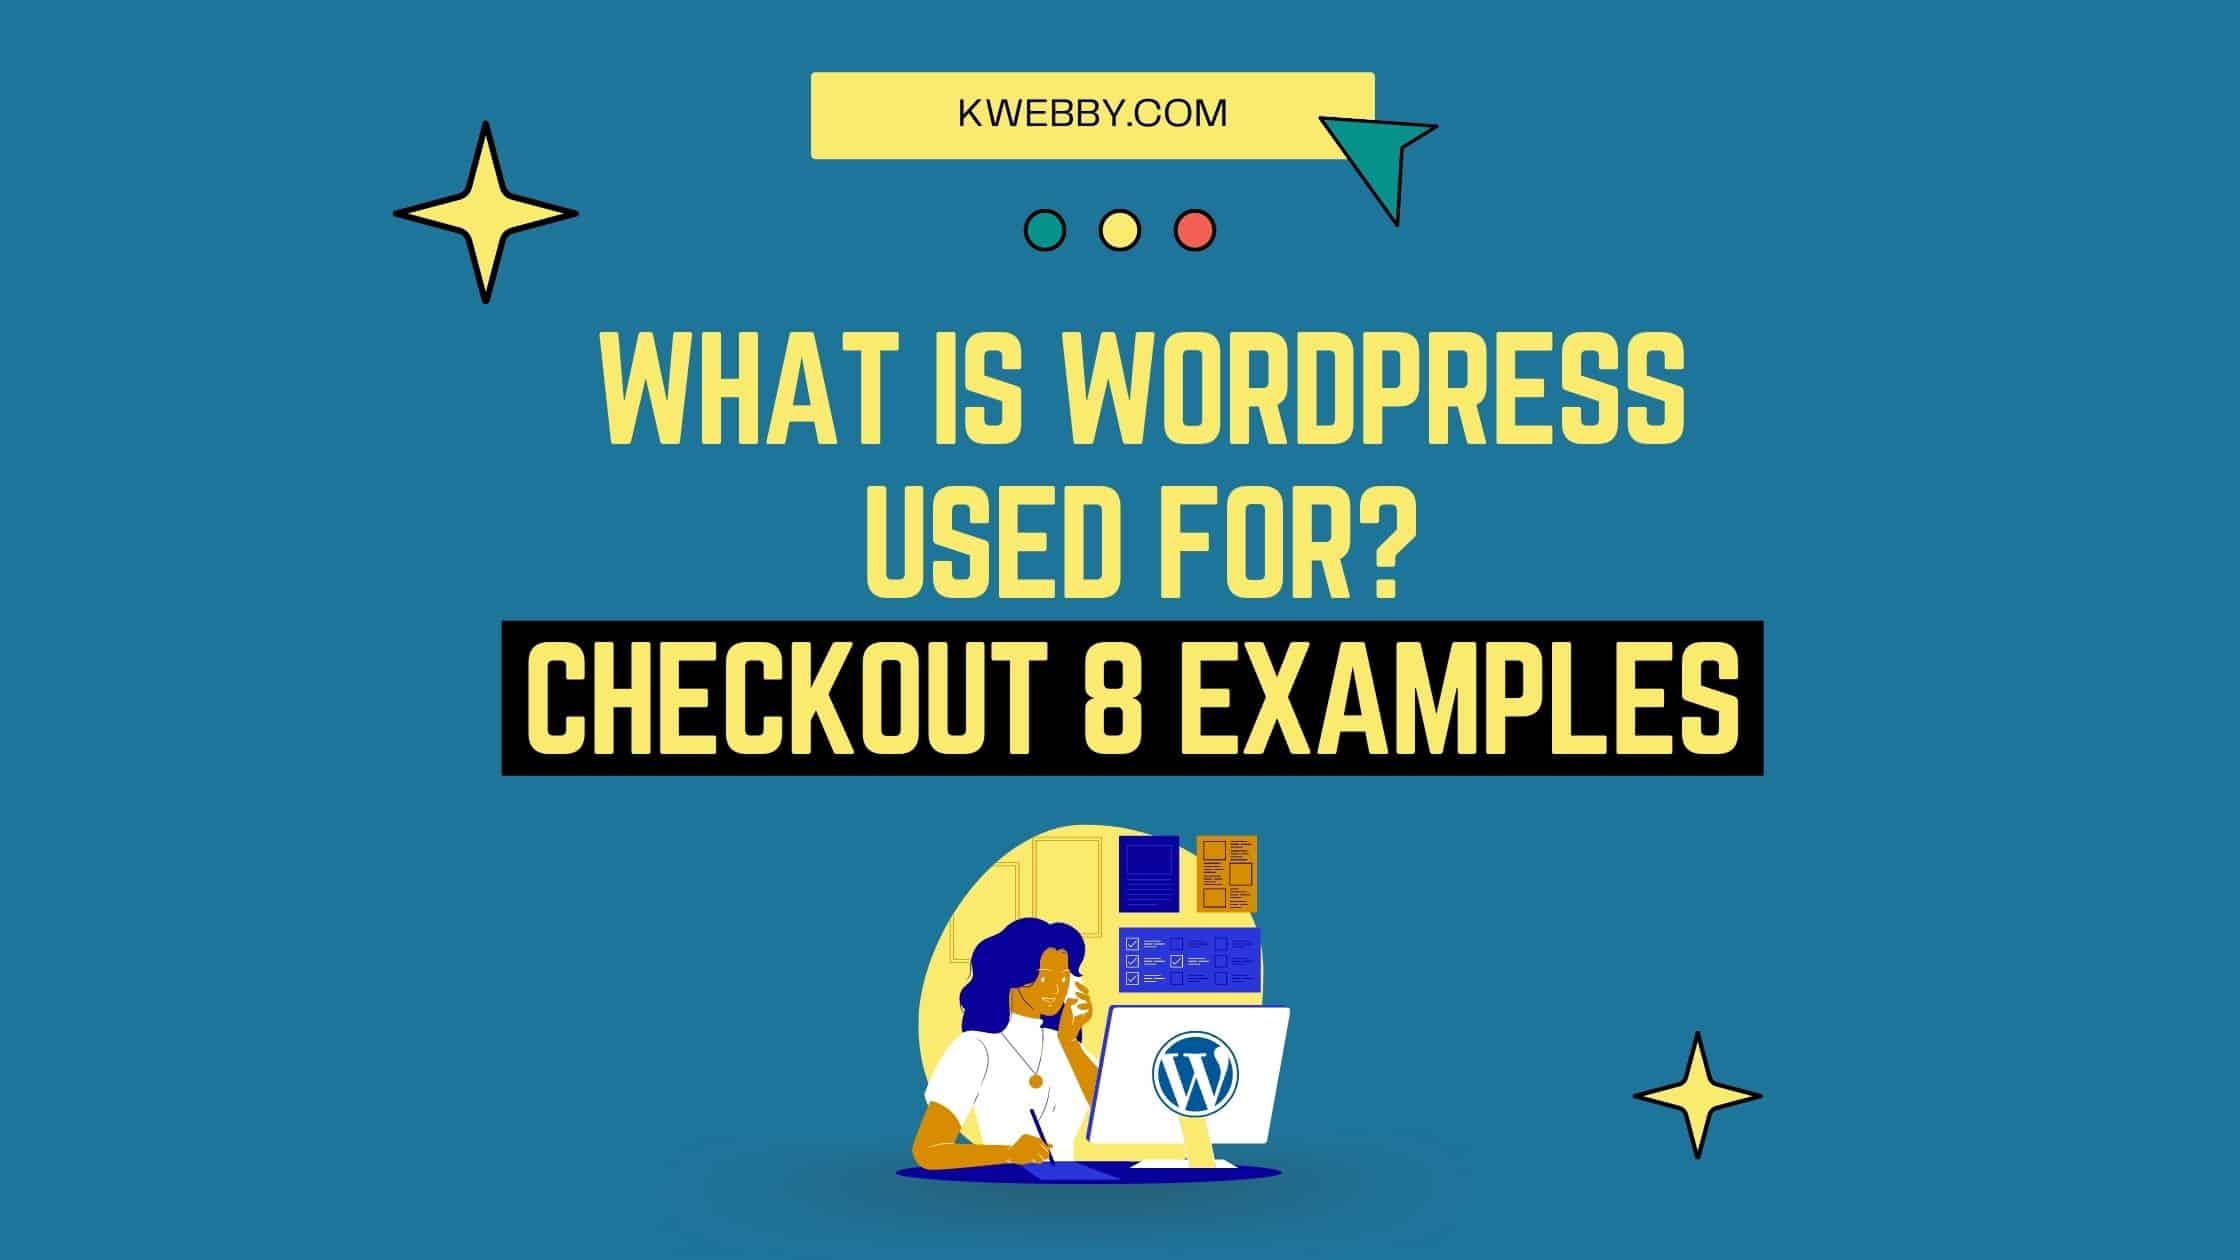 What is WordPress used for? Here are 8 Examples to get started